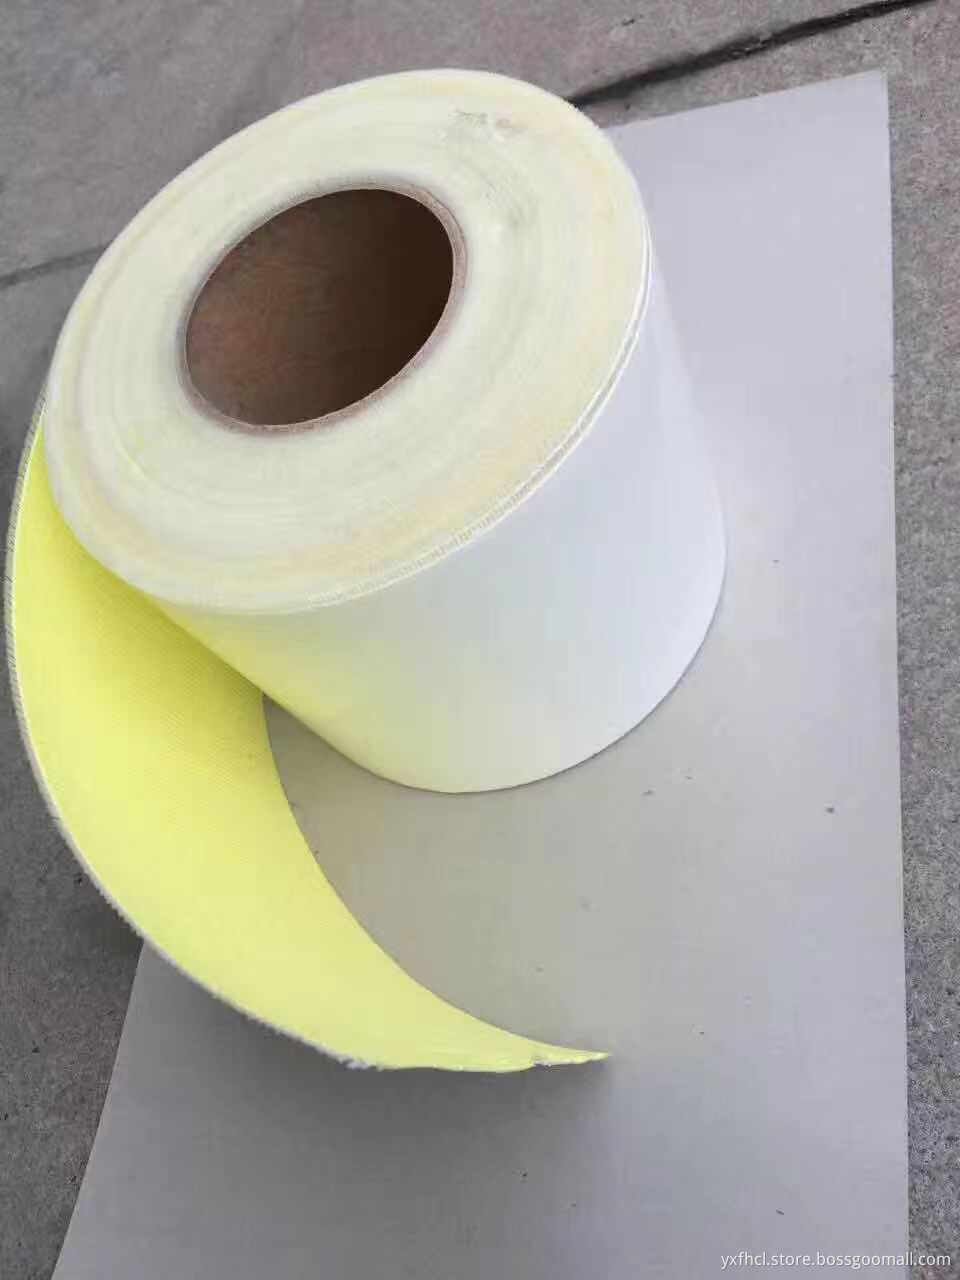 fire resistance silicone rubber coated fabric